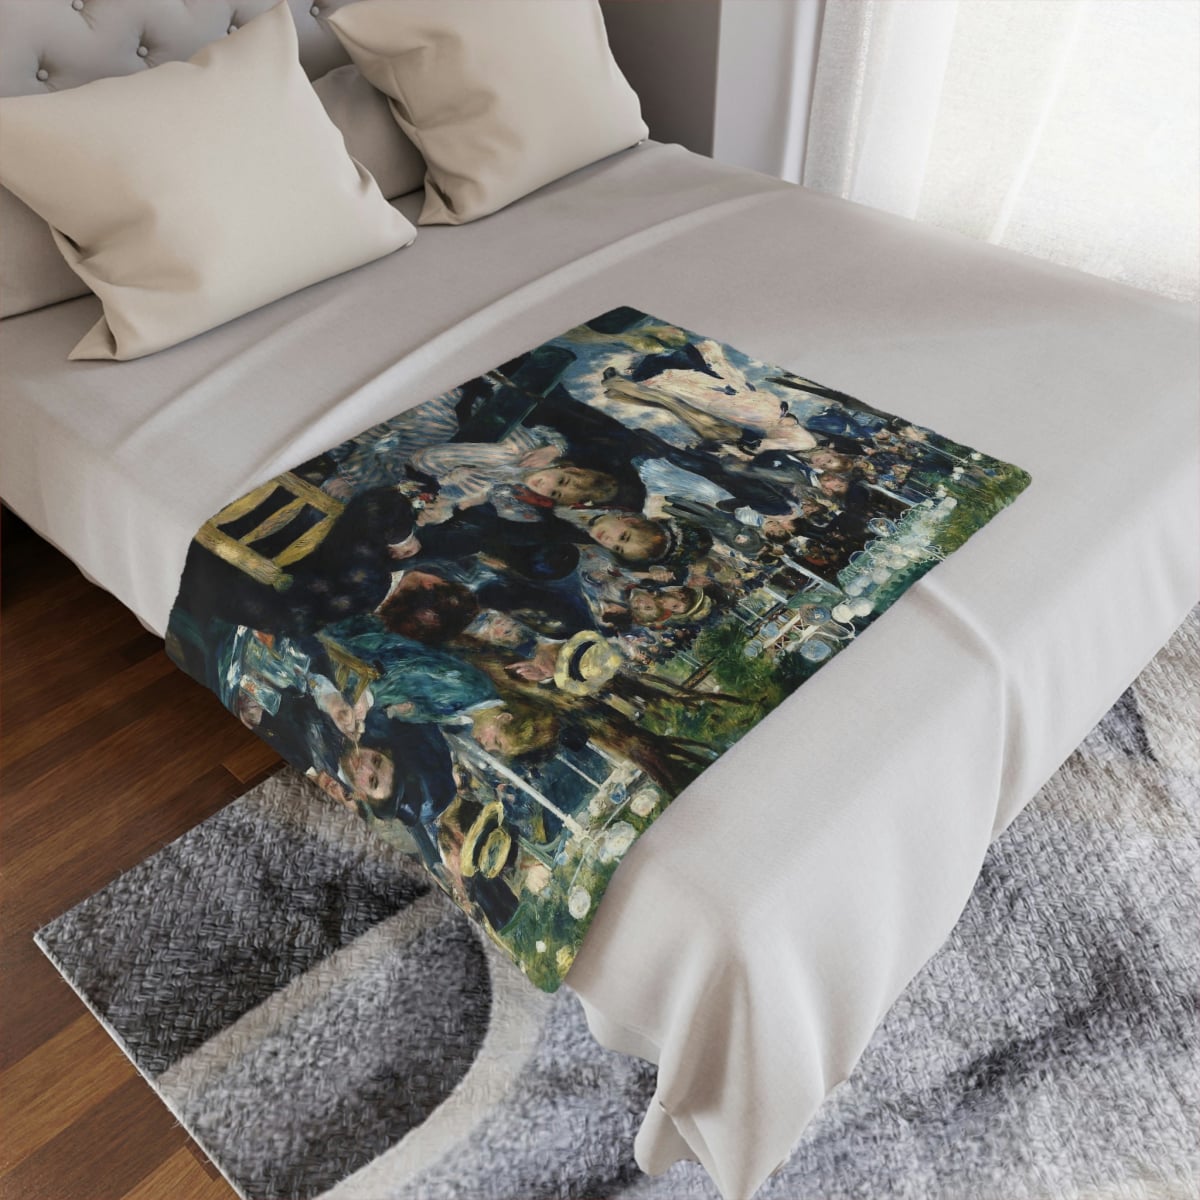 Renoir's timeless artistry on a soft and versatile blanket